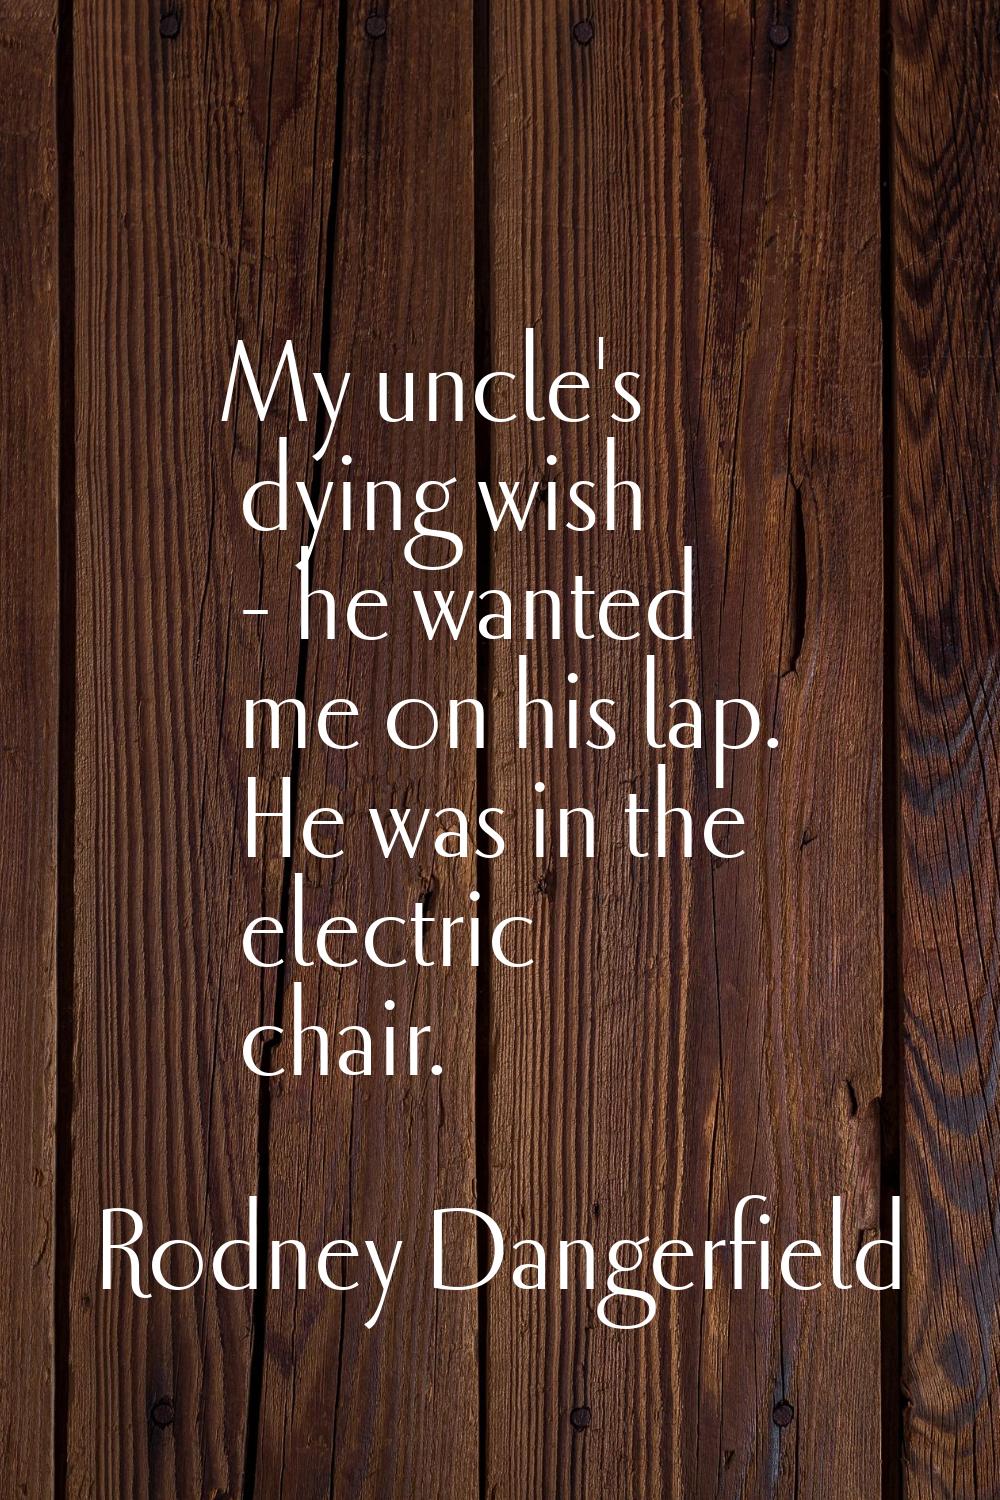 My uncle's dying wish - he wanted me on his lap. He was in the electric chair.